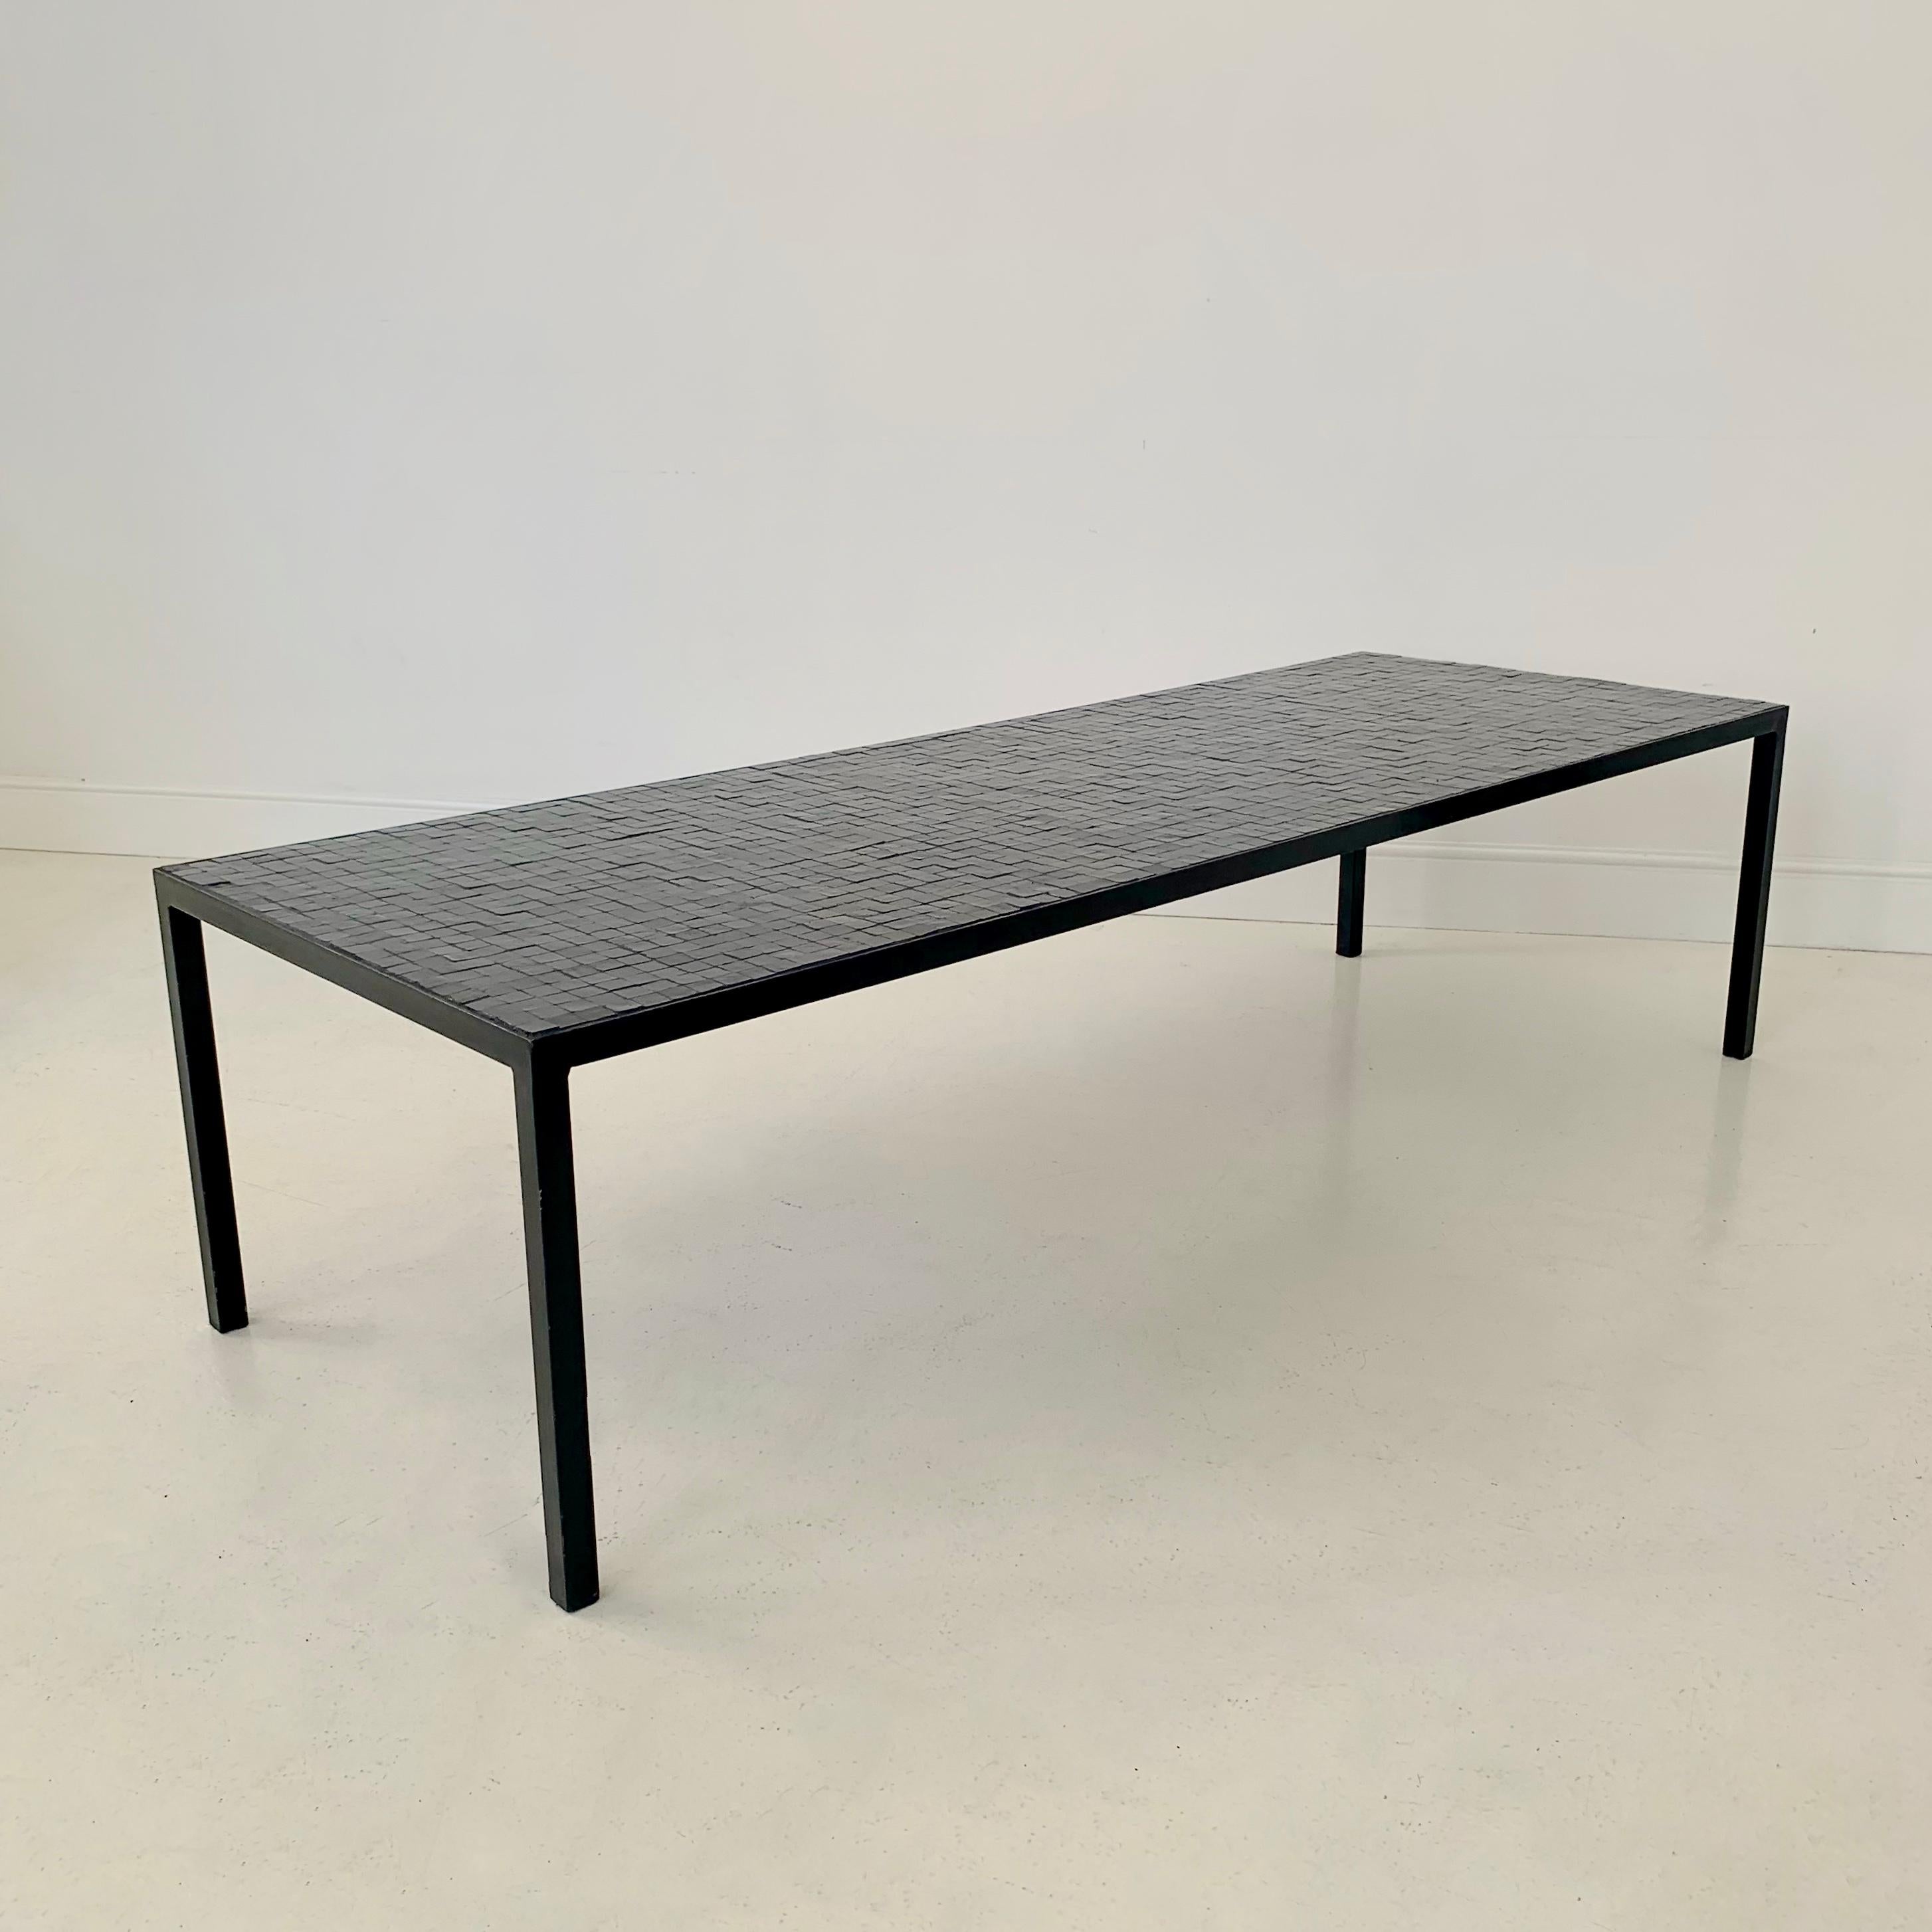 Elegant large mid-century black glass mosaic coffee table by Berthold Muller, circa 1960, Germany.
Black glass mosaic, black lacquered metal.
Dimensions: 156 cm W, 57 cm D, 40 cm H.
Good original condition.
All purchases are covered by our Buyer